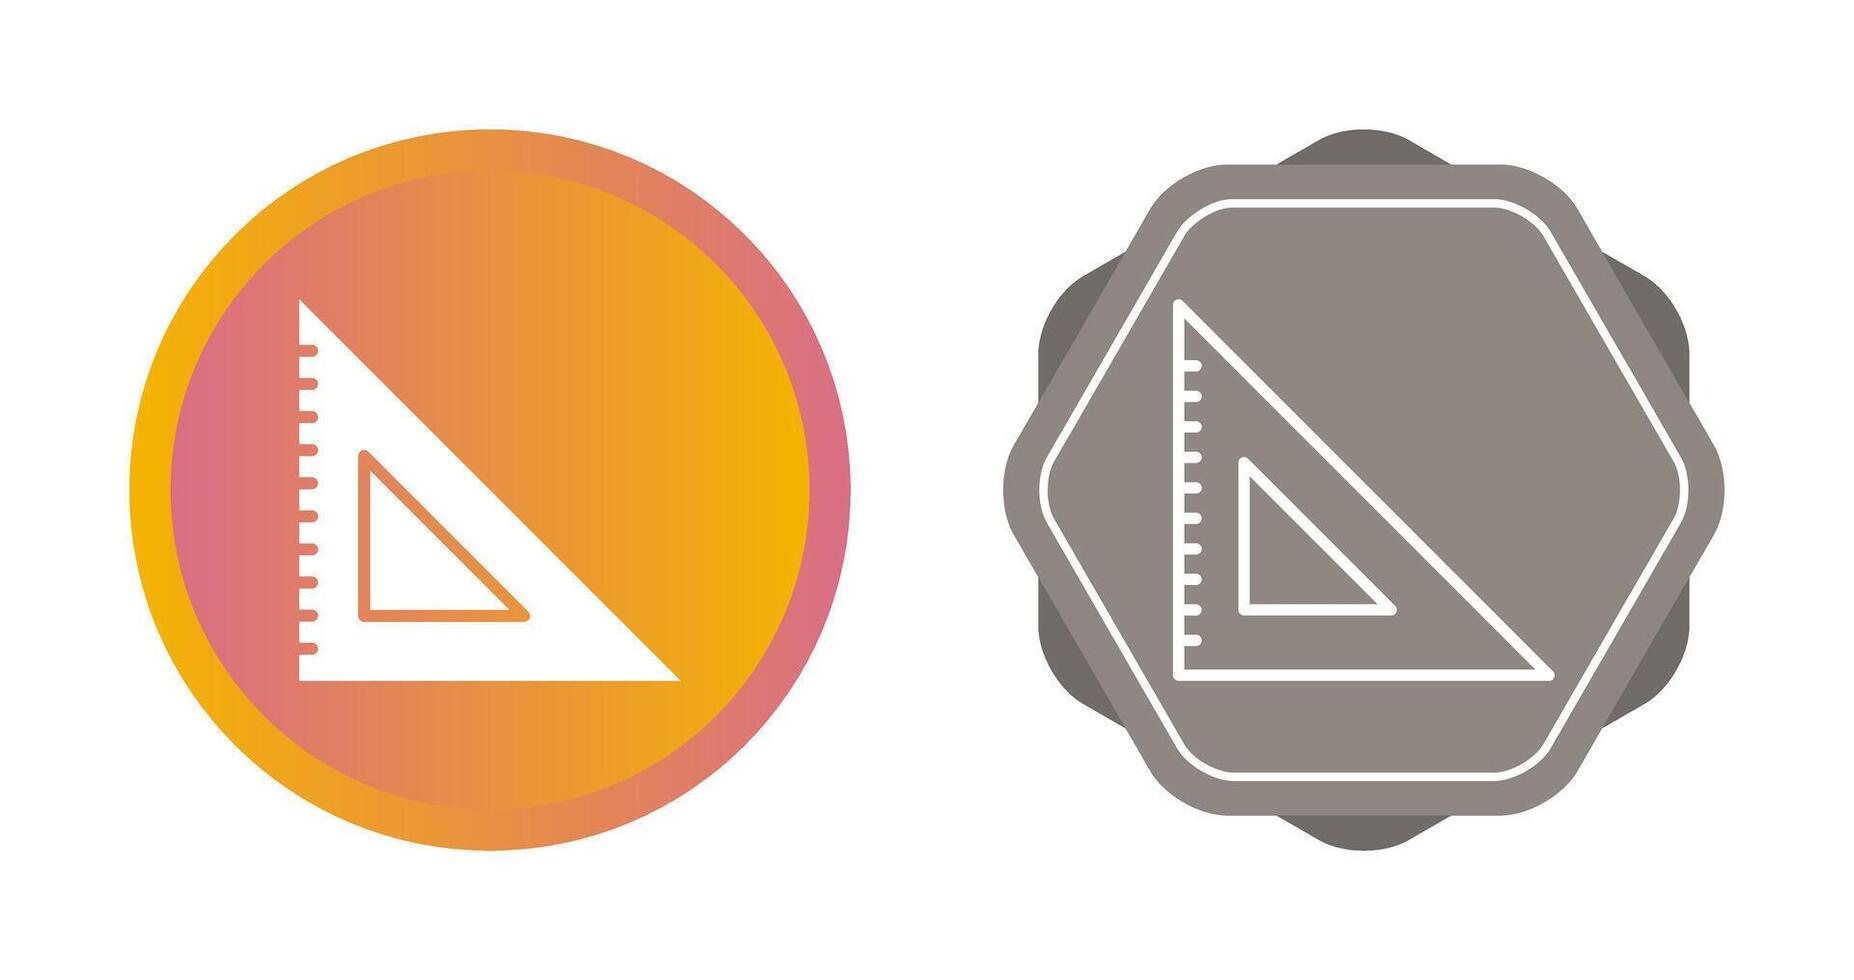 Drafting Compass Vector Icon